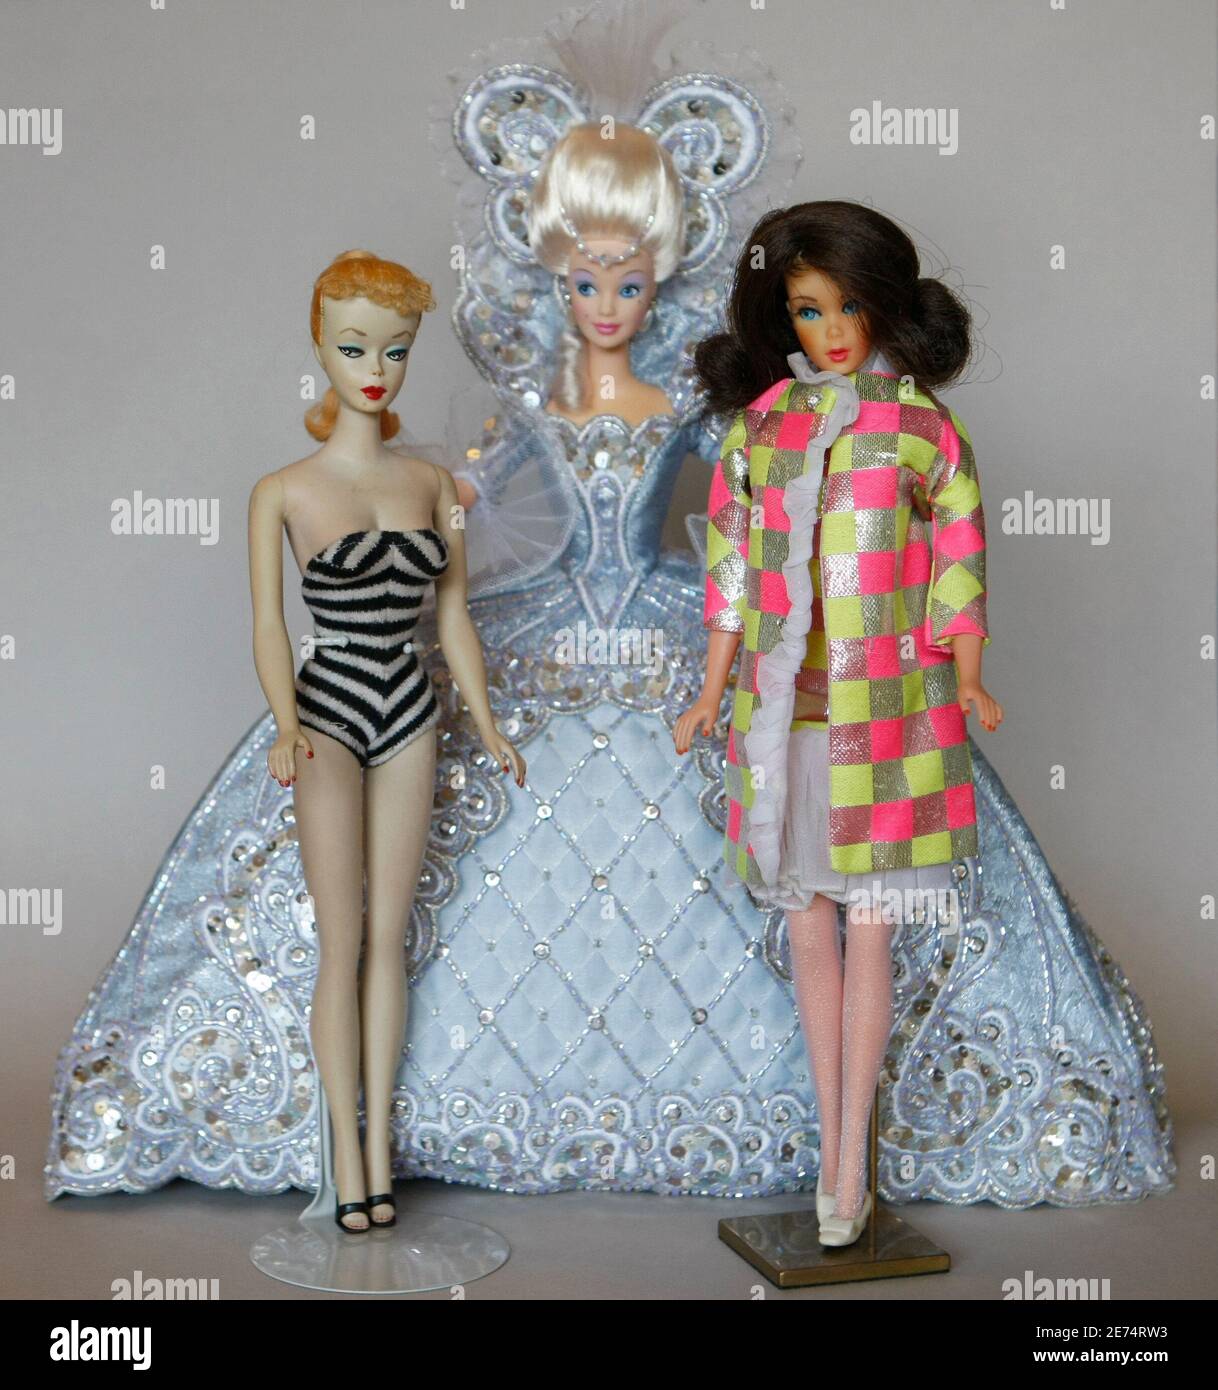 Barbie doll No.1 from 1959 (L), a Barbie doll of the 90s (C) and of the 60s  are pictured in Duesseldorf February 3, 2009. Bettina Dorfmann owns more  than 6,000 Barbie dolls